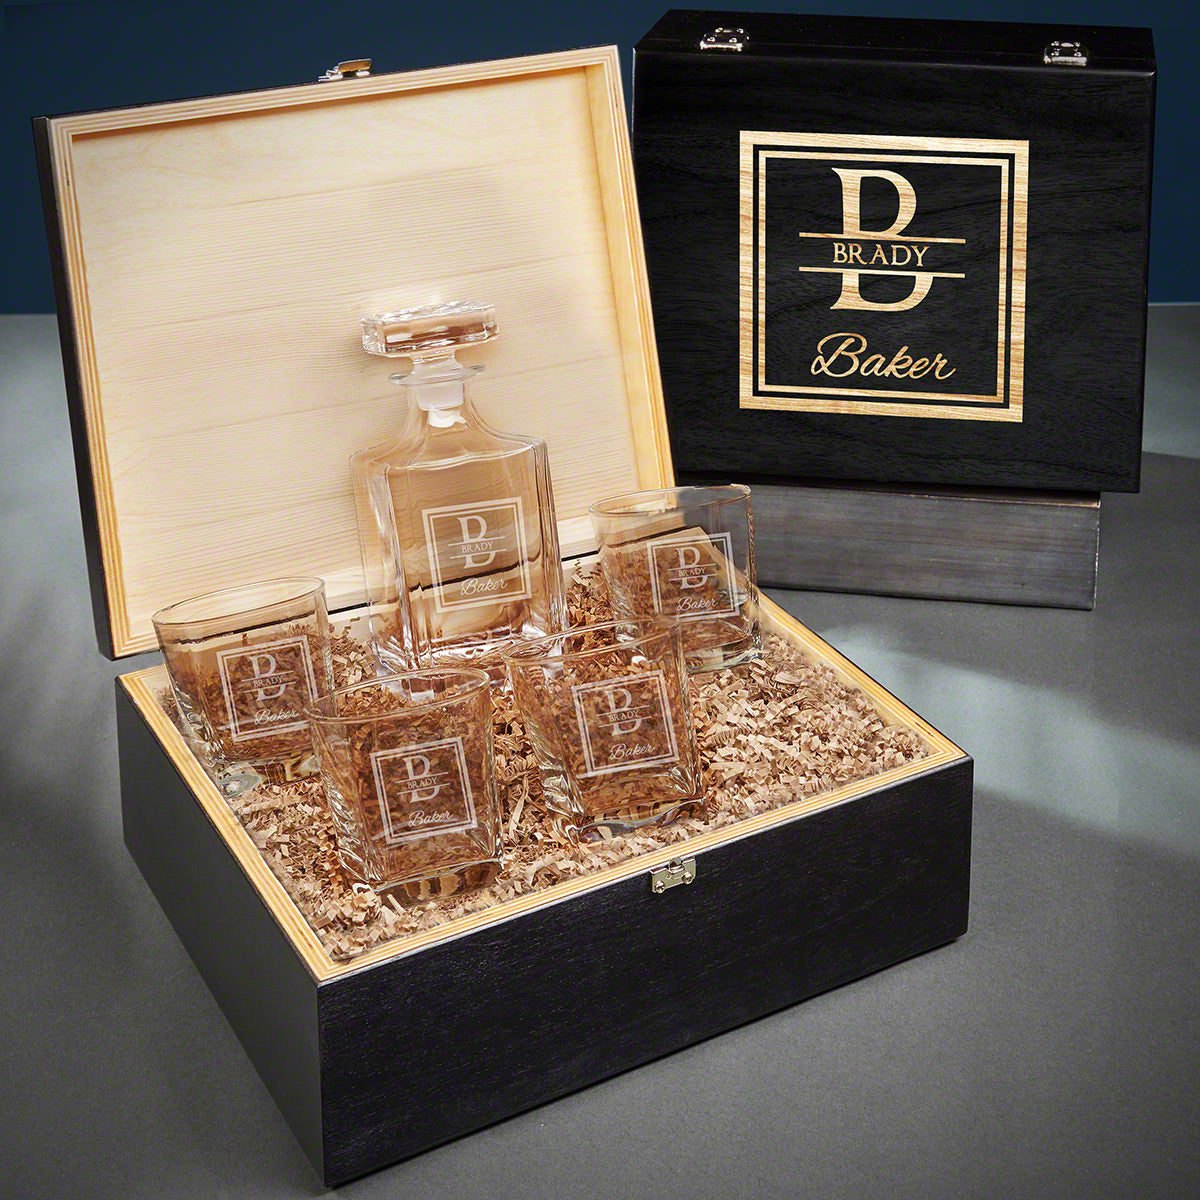 Custom Rutherford Gifts for Bourbon Lovers - Carson Decanter and Glasses in Ebony Black Box